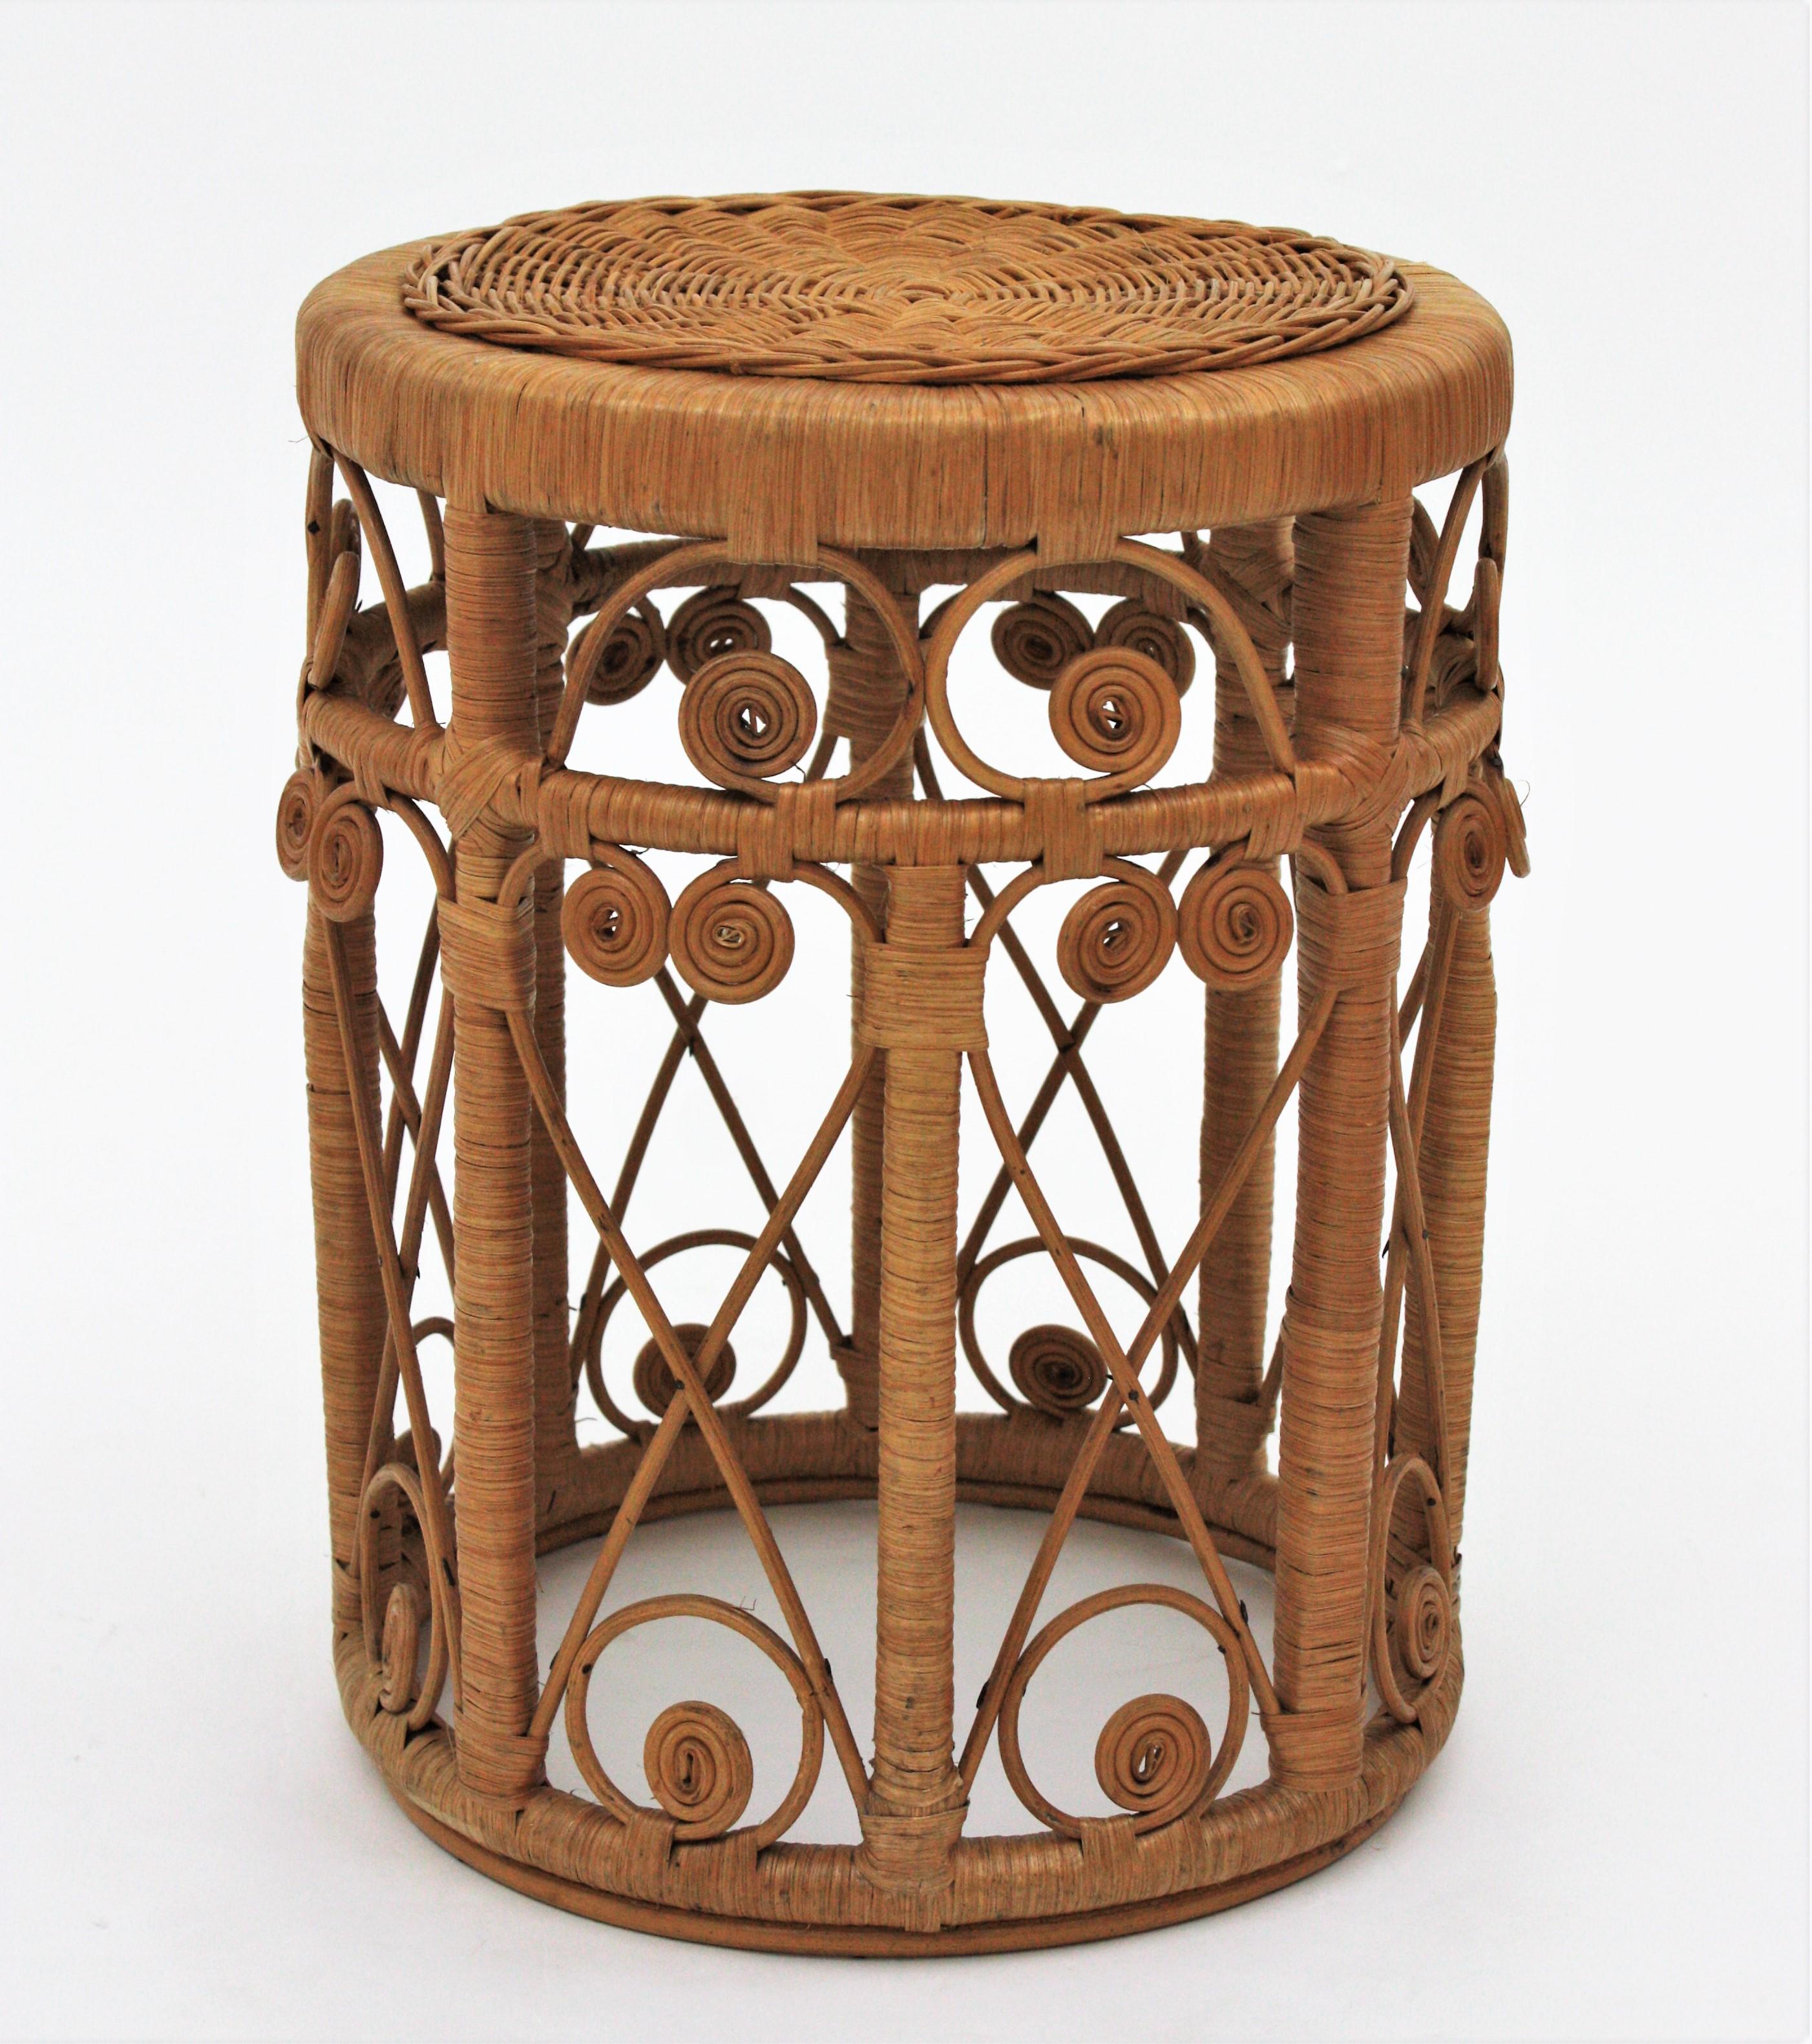 Spanish Rattan Round Stool or End Table with Filigree Details, 1960s